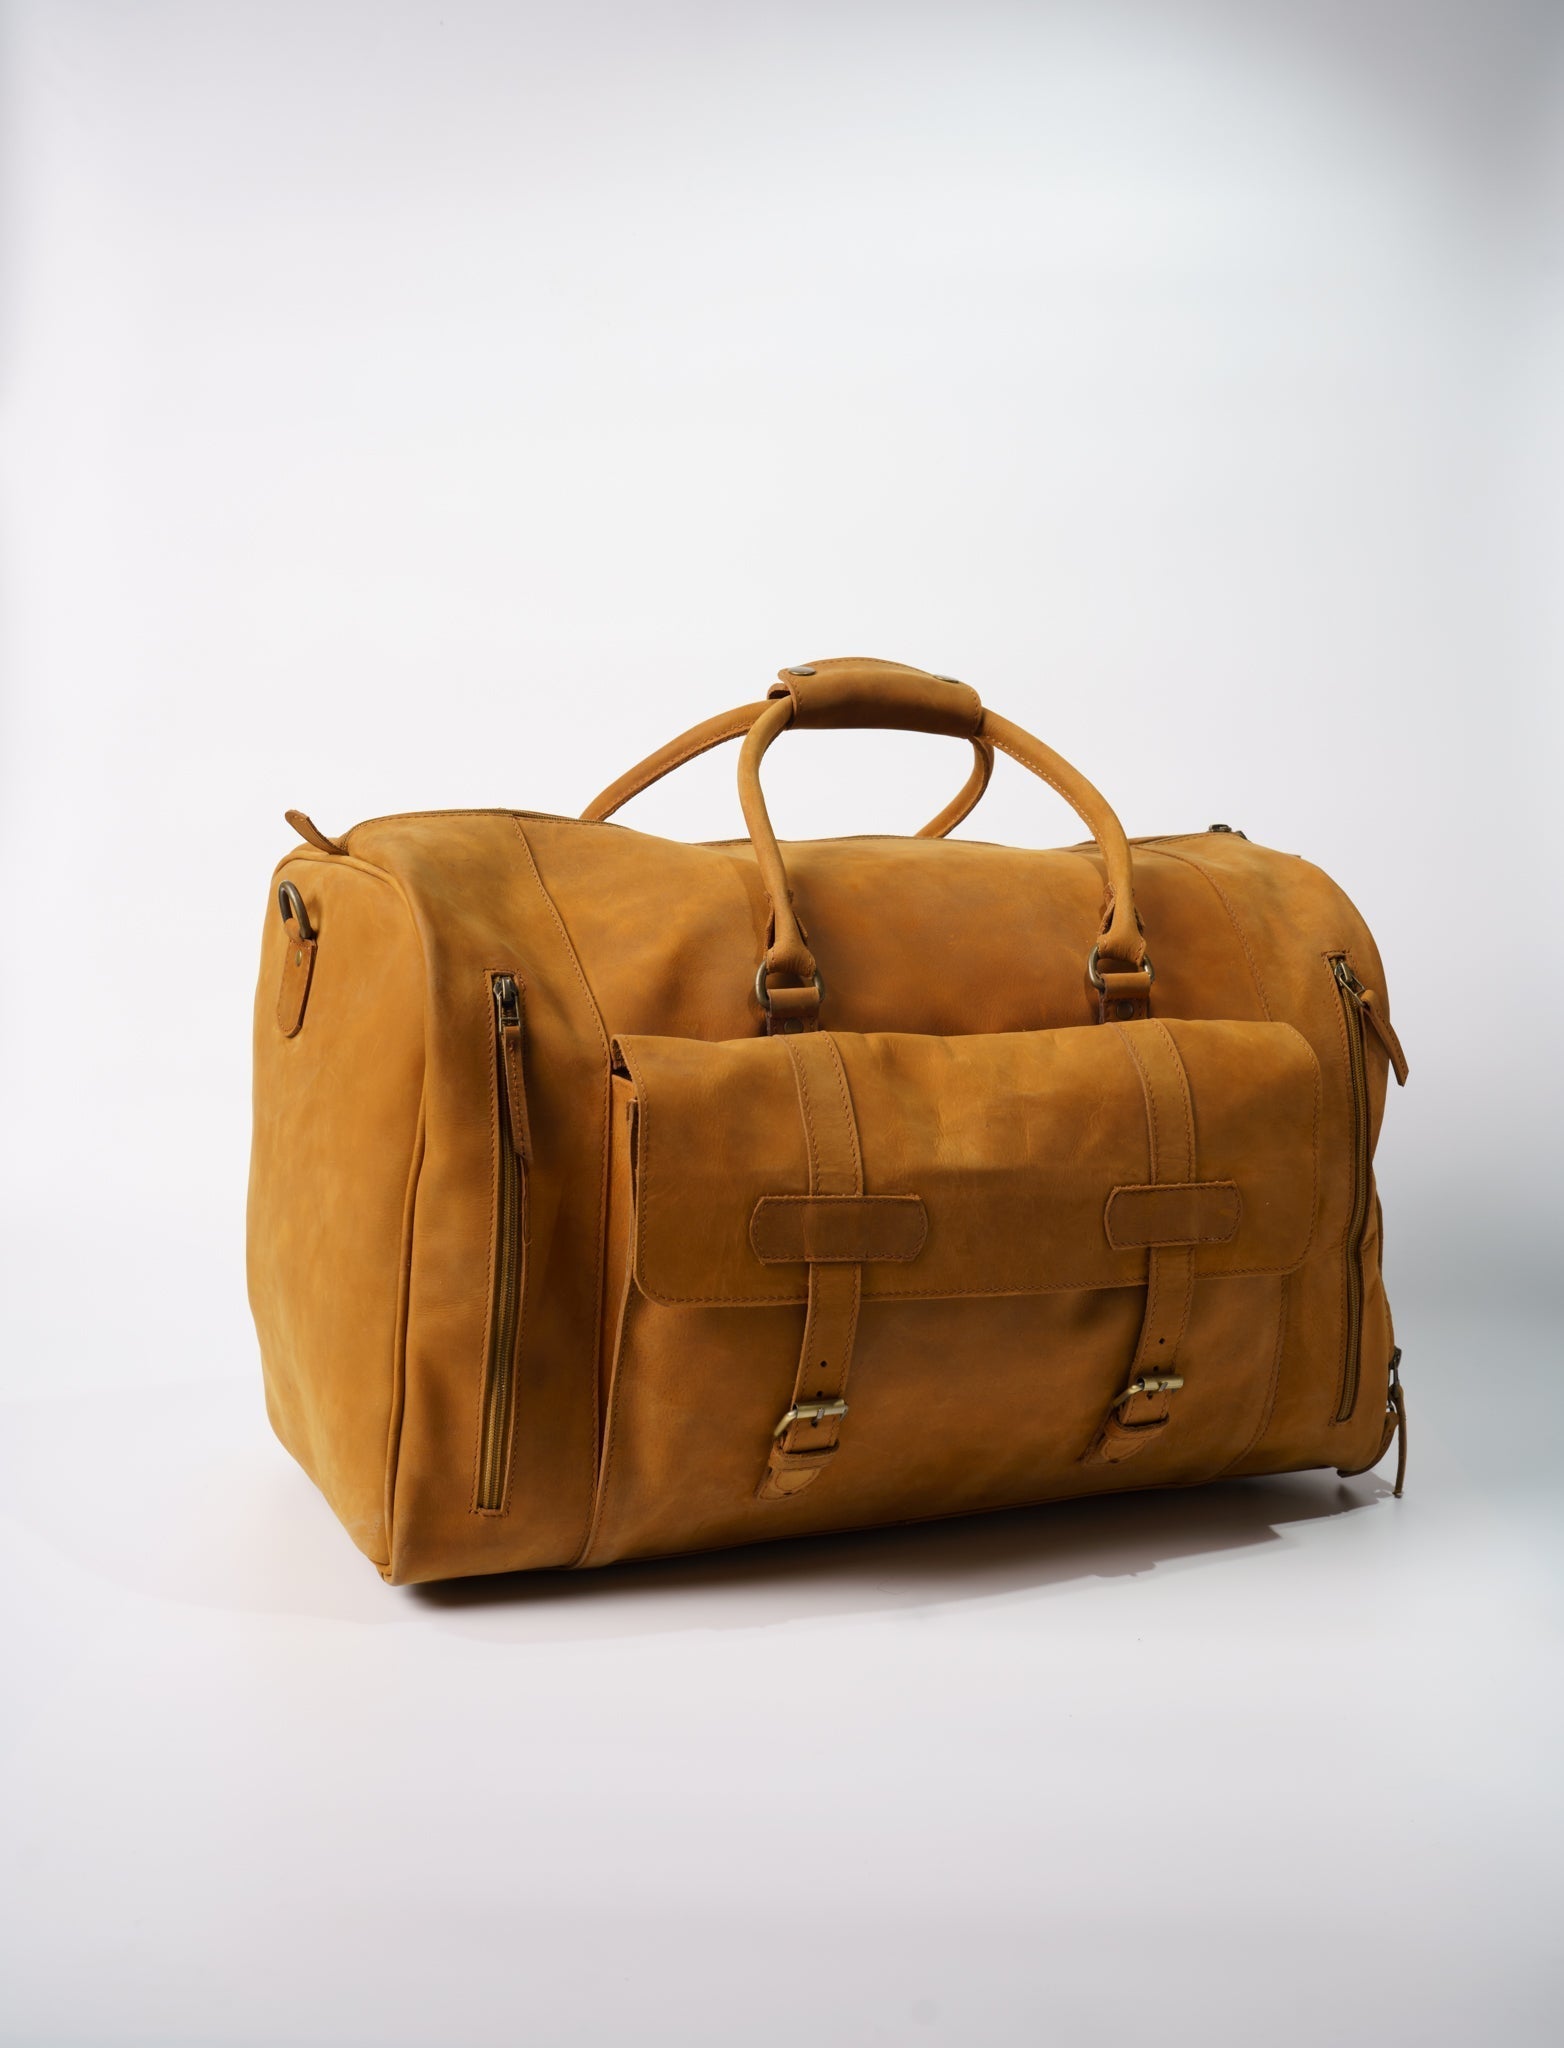 Front view of Chamra's Duffle Bag with shoe compartment, showcasing the large size of the duffel bag along with the multiple outside pockets on the bag.